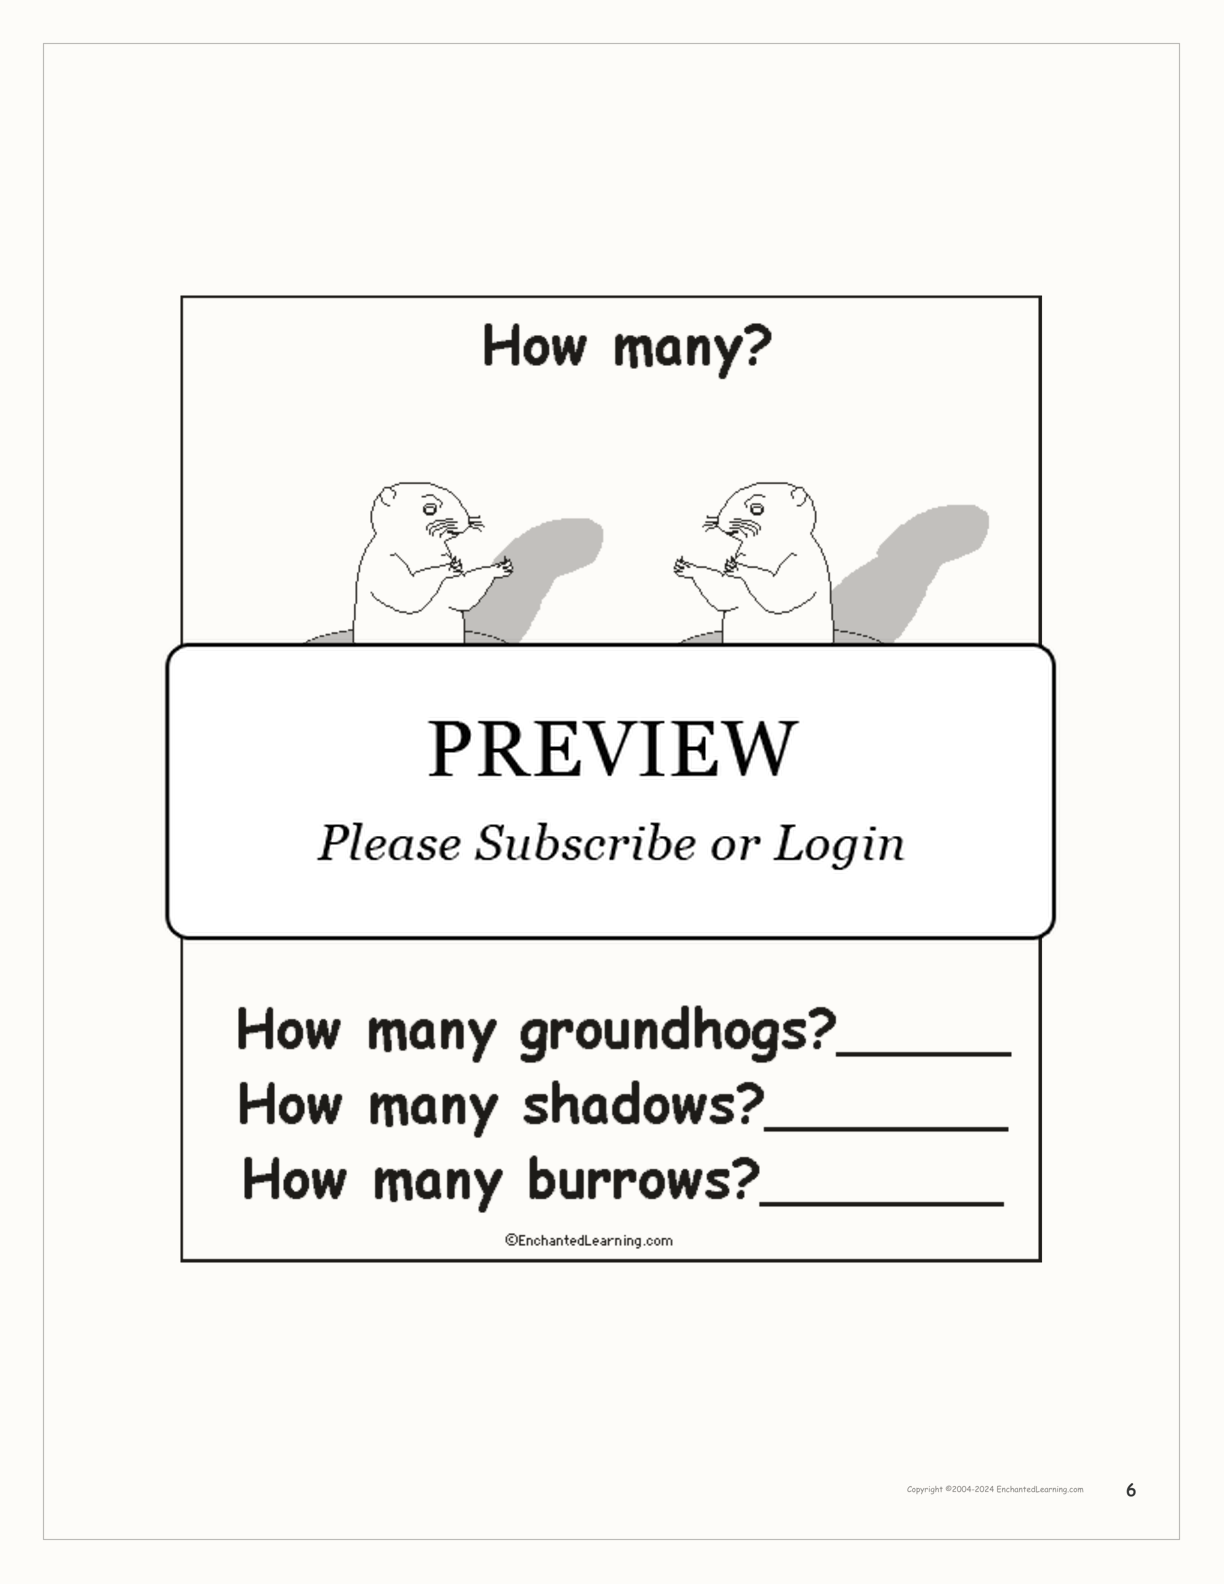 'Groundhog Day: How Many?' interactive worksheet page 6